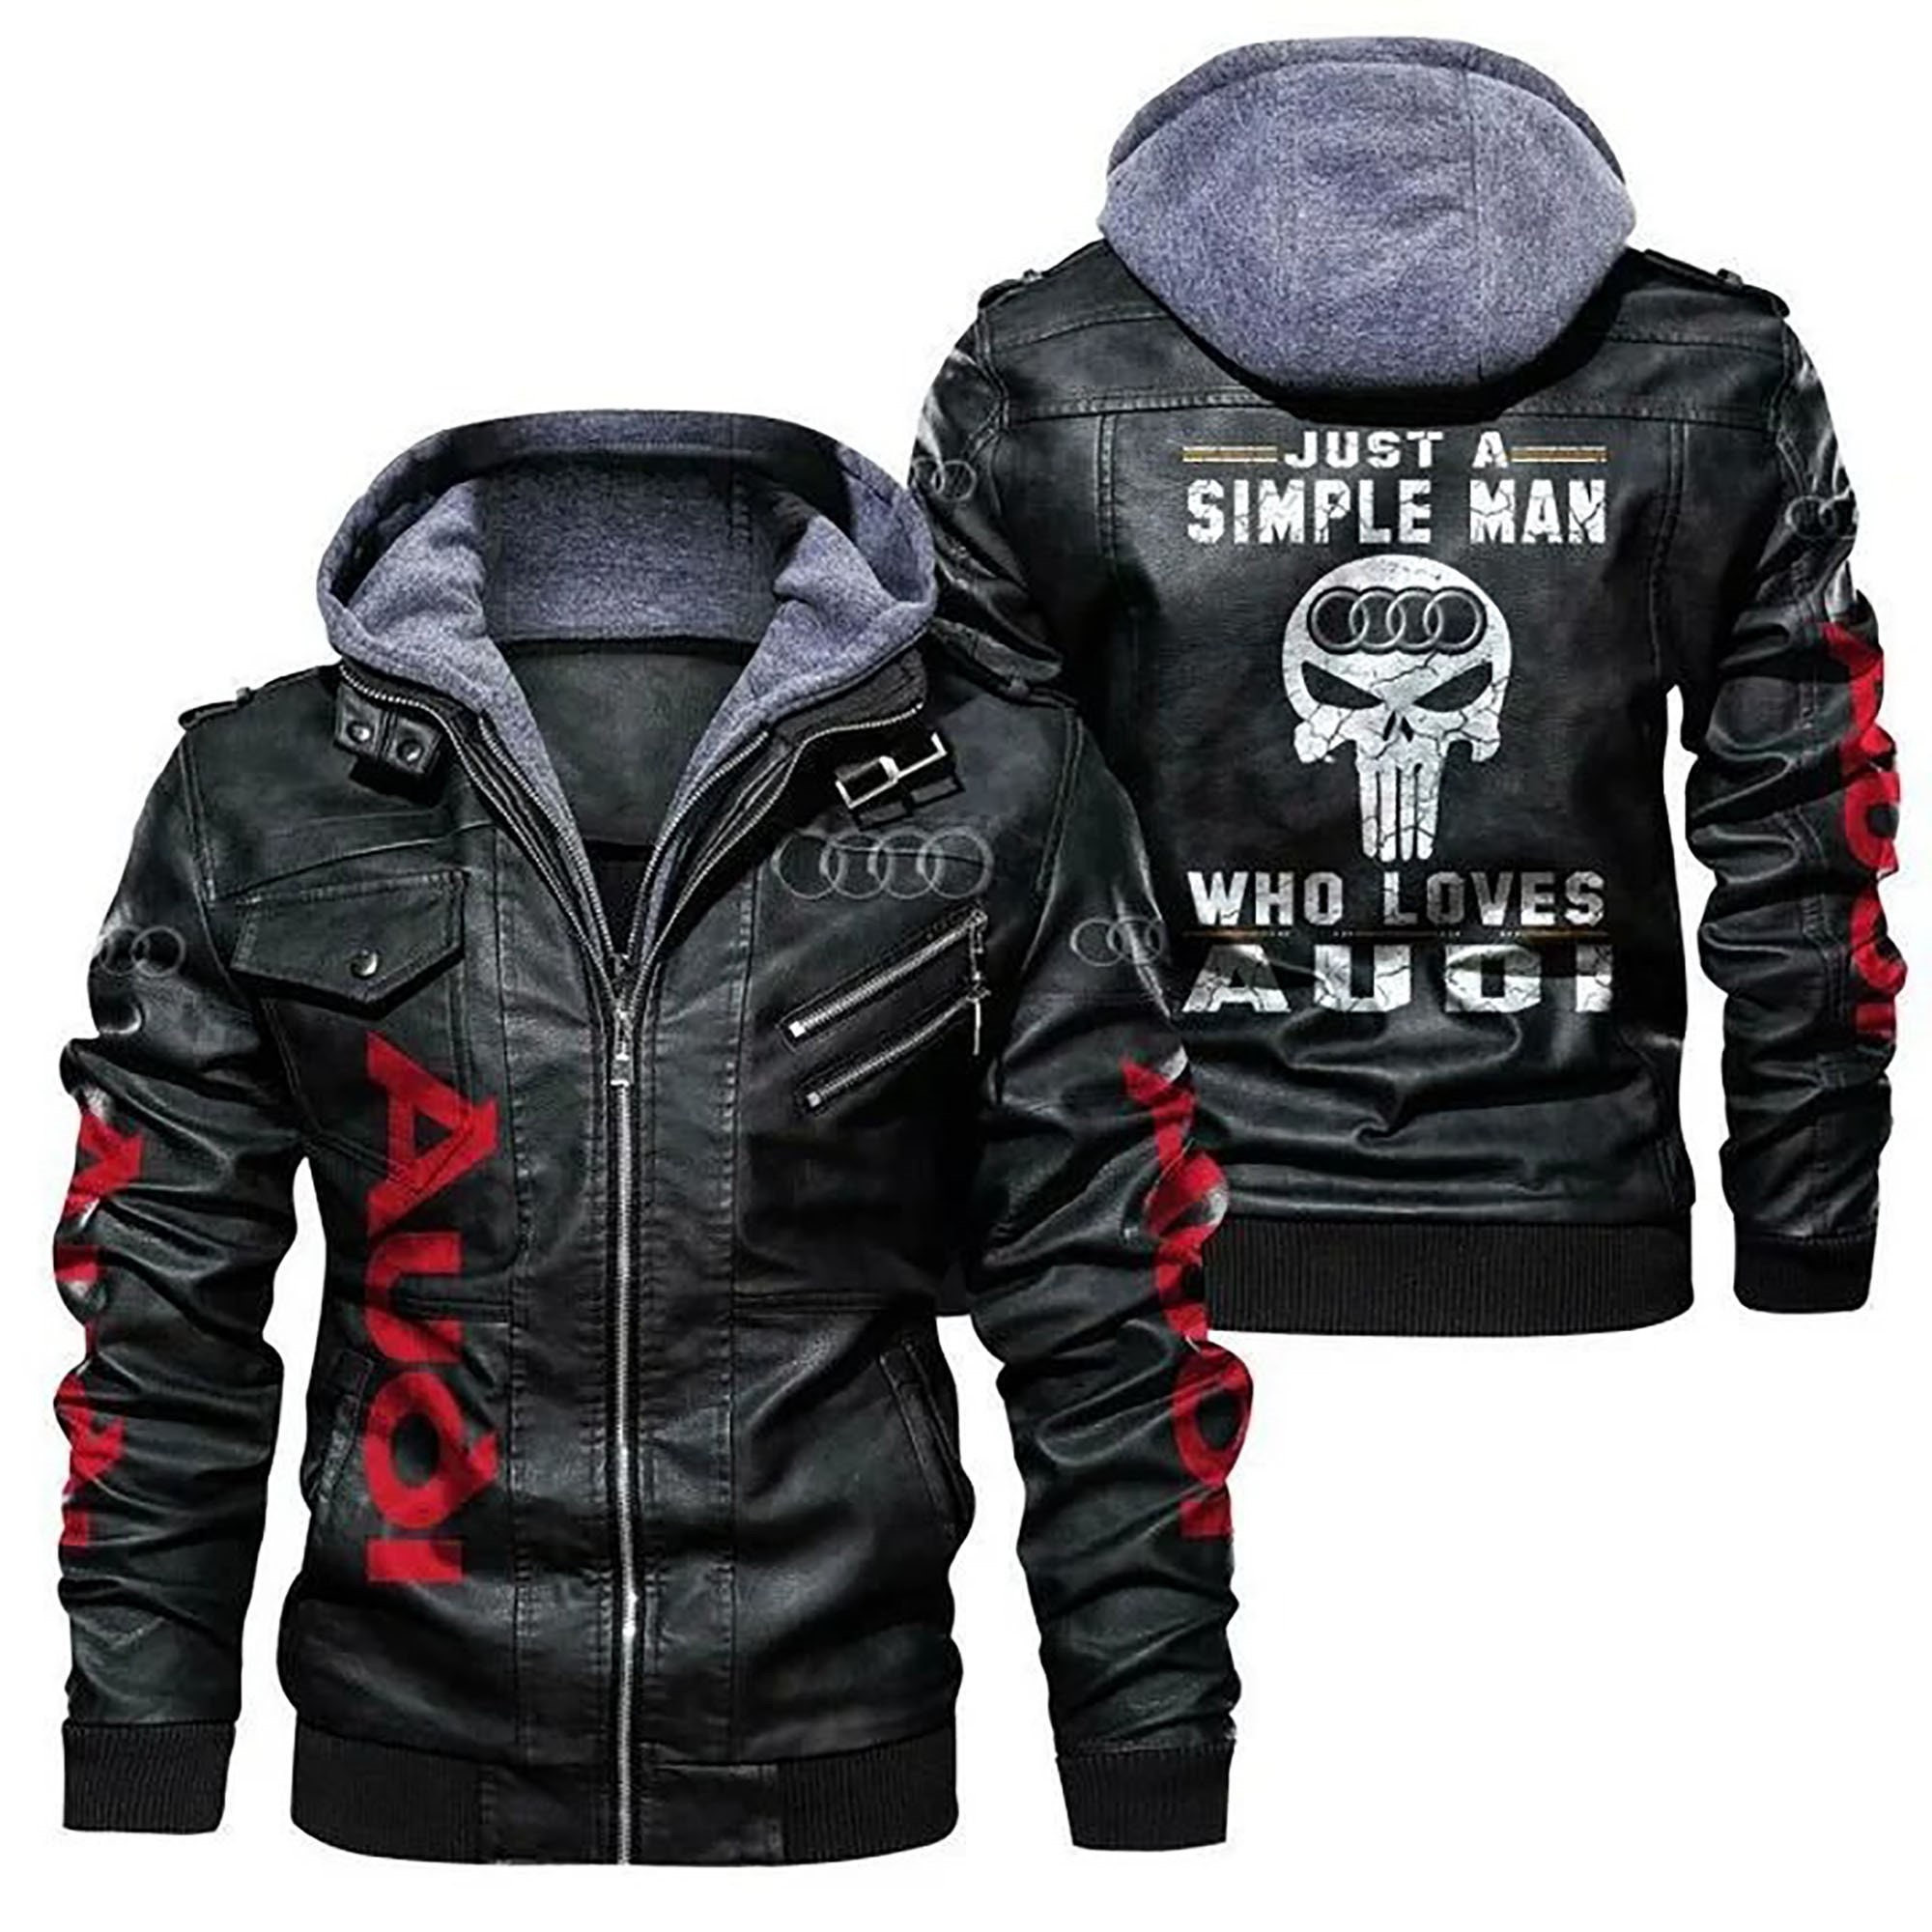 These Amazing Leather Jacket will add to the appeal of your outfit 431